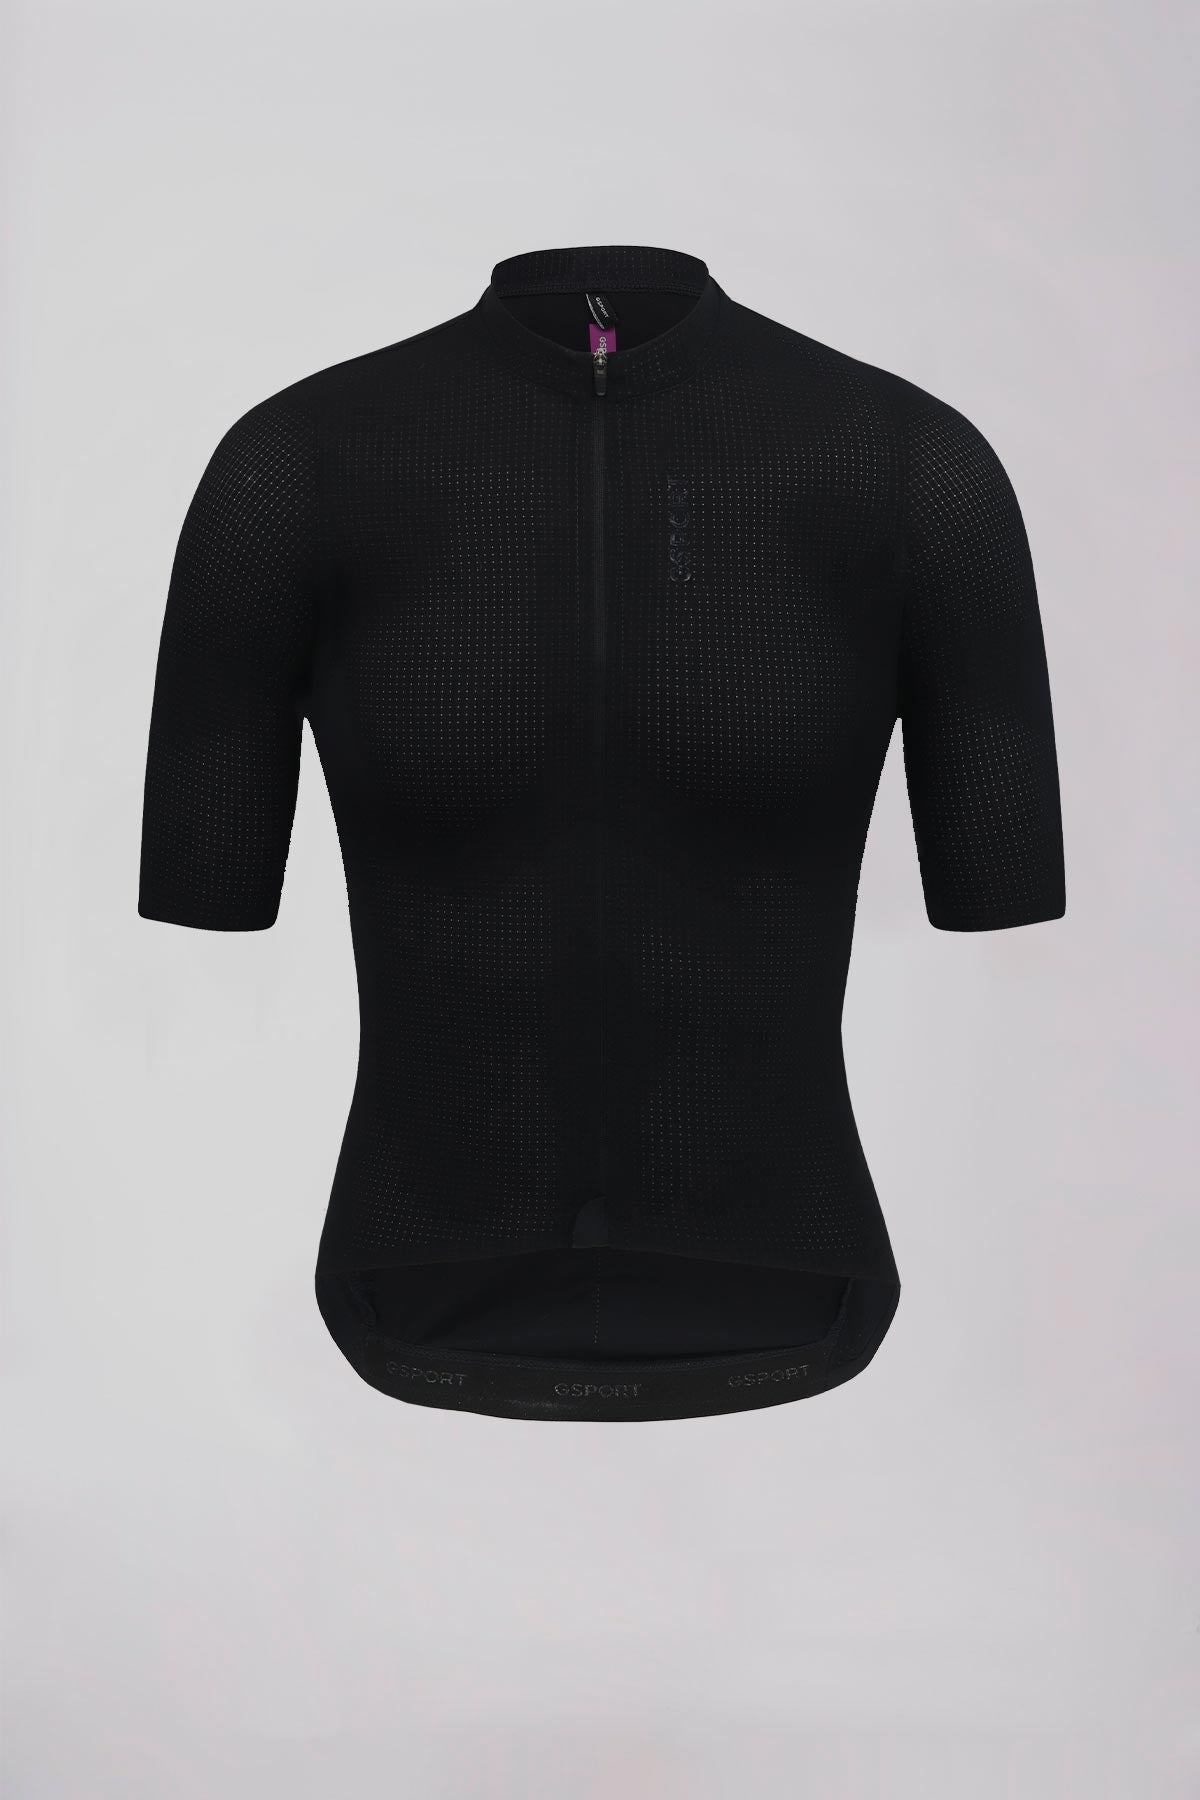 Maillot Pro Skin Carbon Mujer - Gsport Cycling